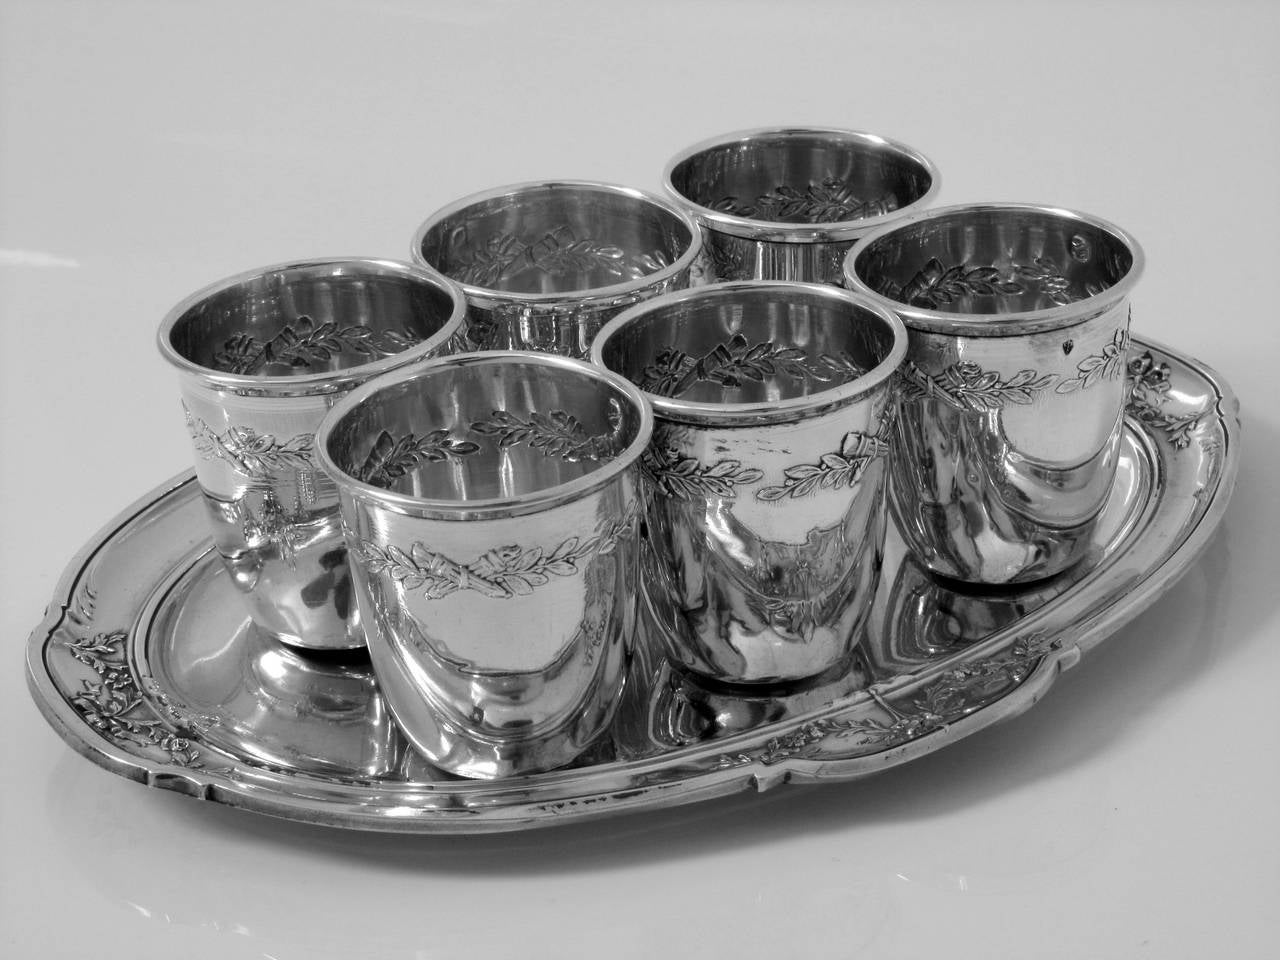 Neoclassical Bergeron French All Sterling Silver Liquor Cups 6 pc w/ Original Tray Louis XVI